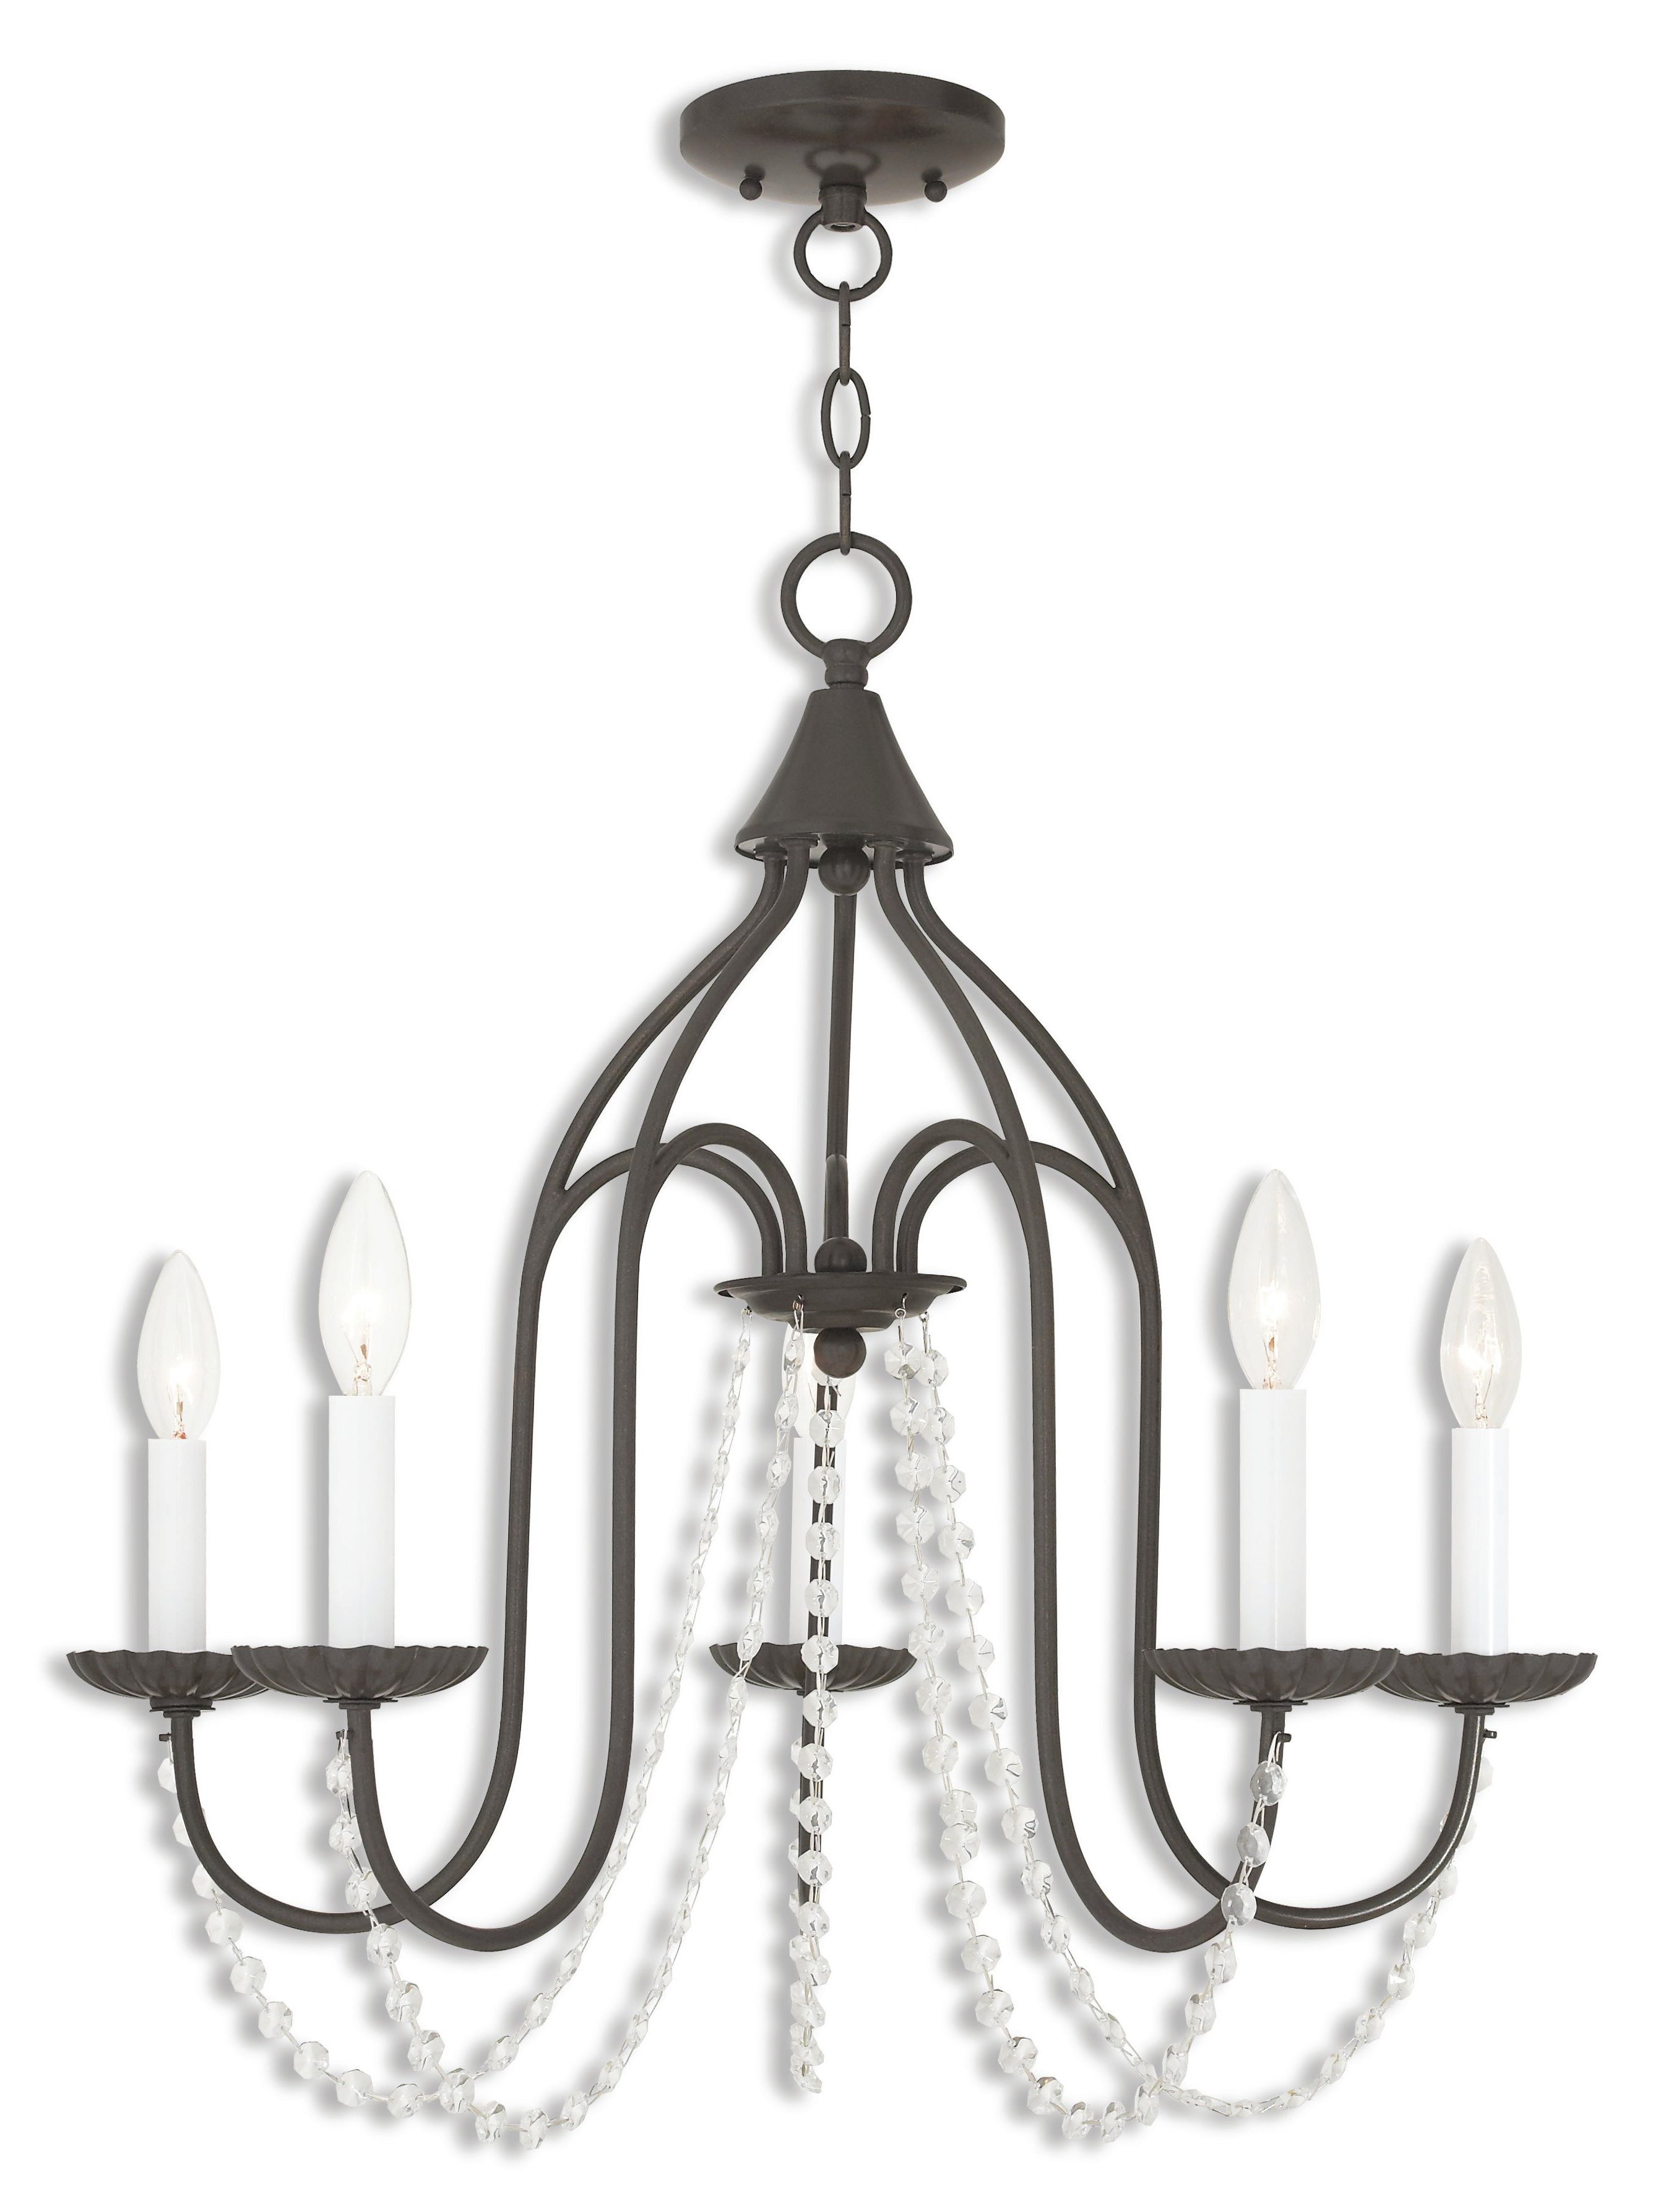 Widely Used Florentina 5 Light Candle Style Chandelier Within Florentina 5 Light Candle Style Chandeliers (View 2 of 20)